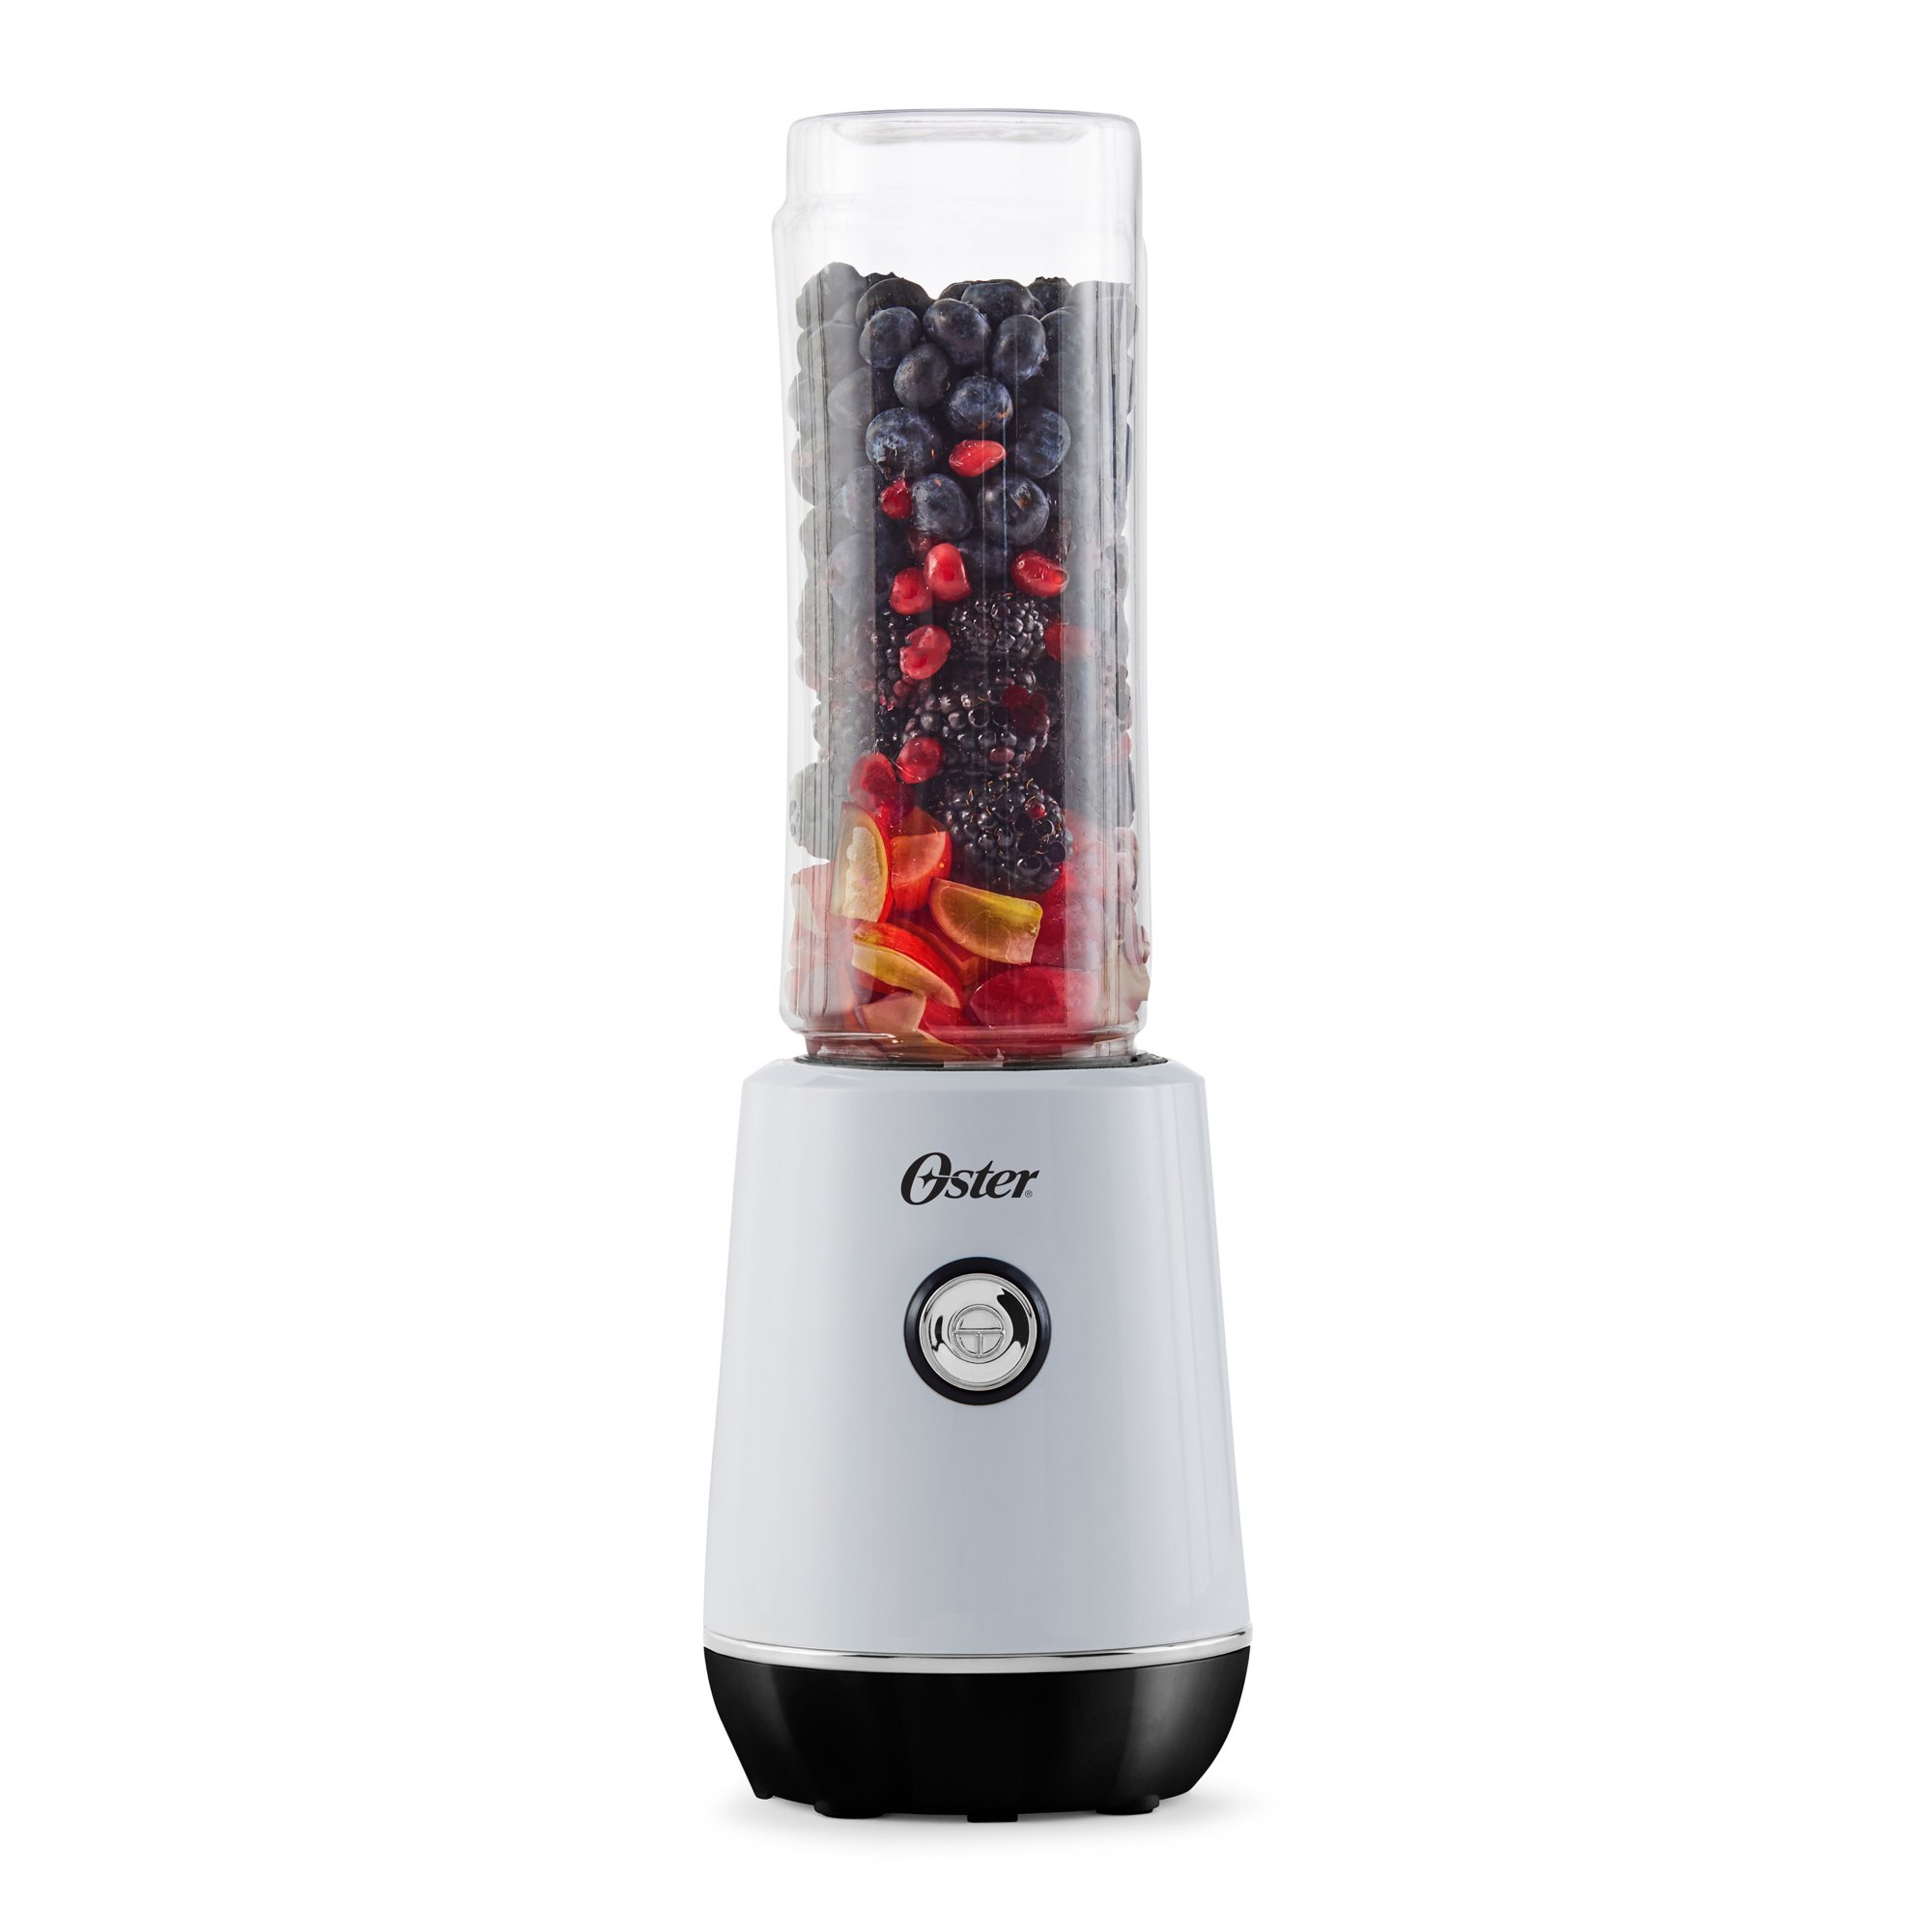 Personal Sports Blender Smoothie Maker and Shake Maker with Travel Lid.  Great little smoothie maker